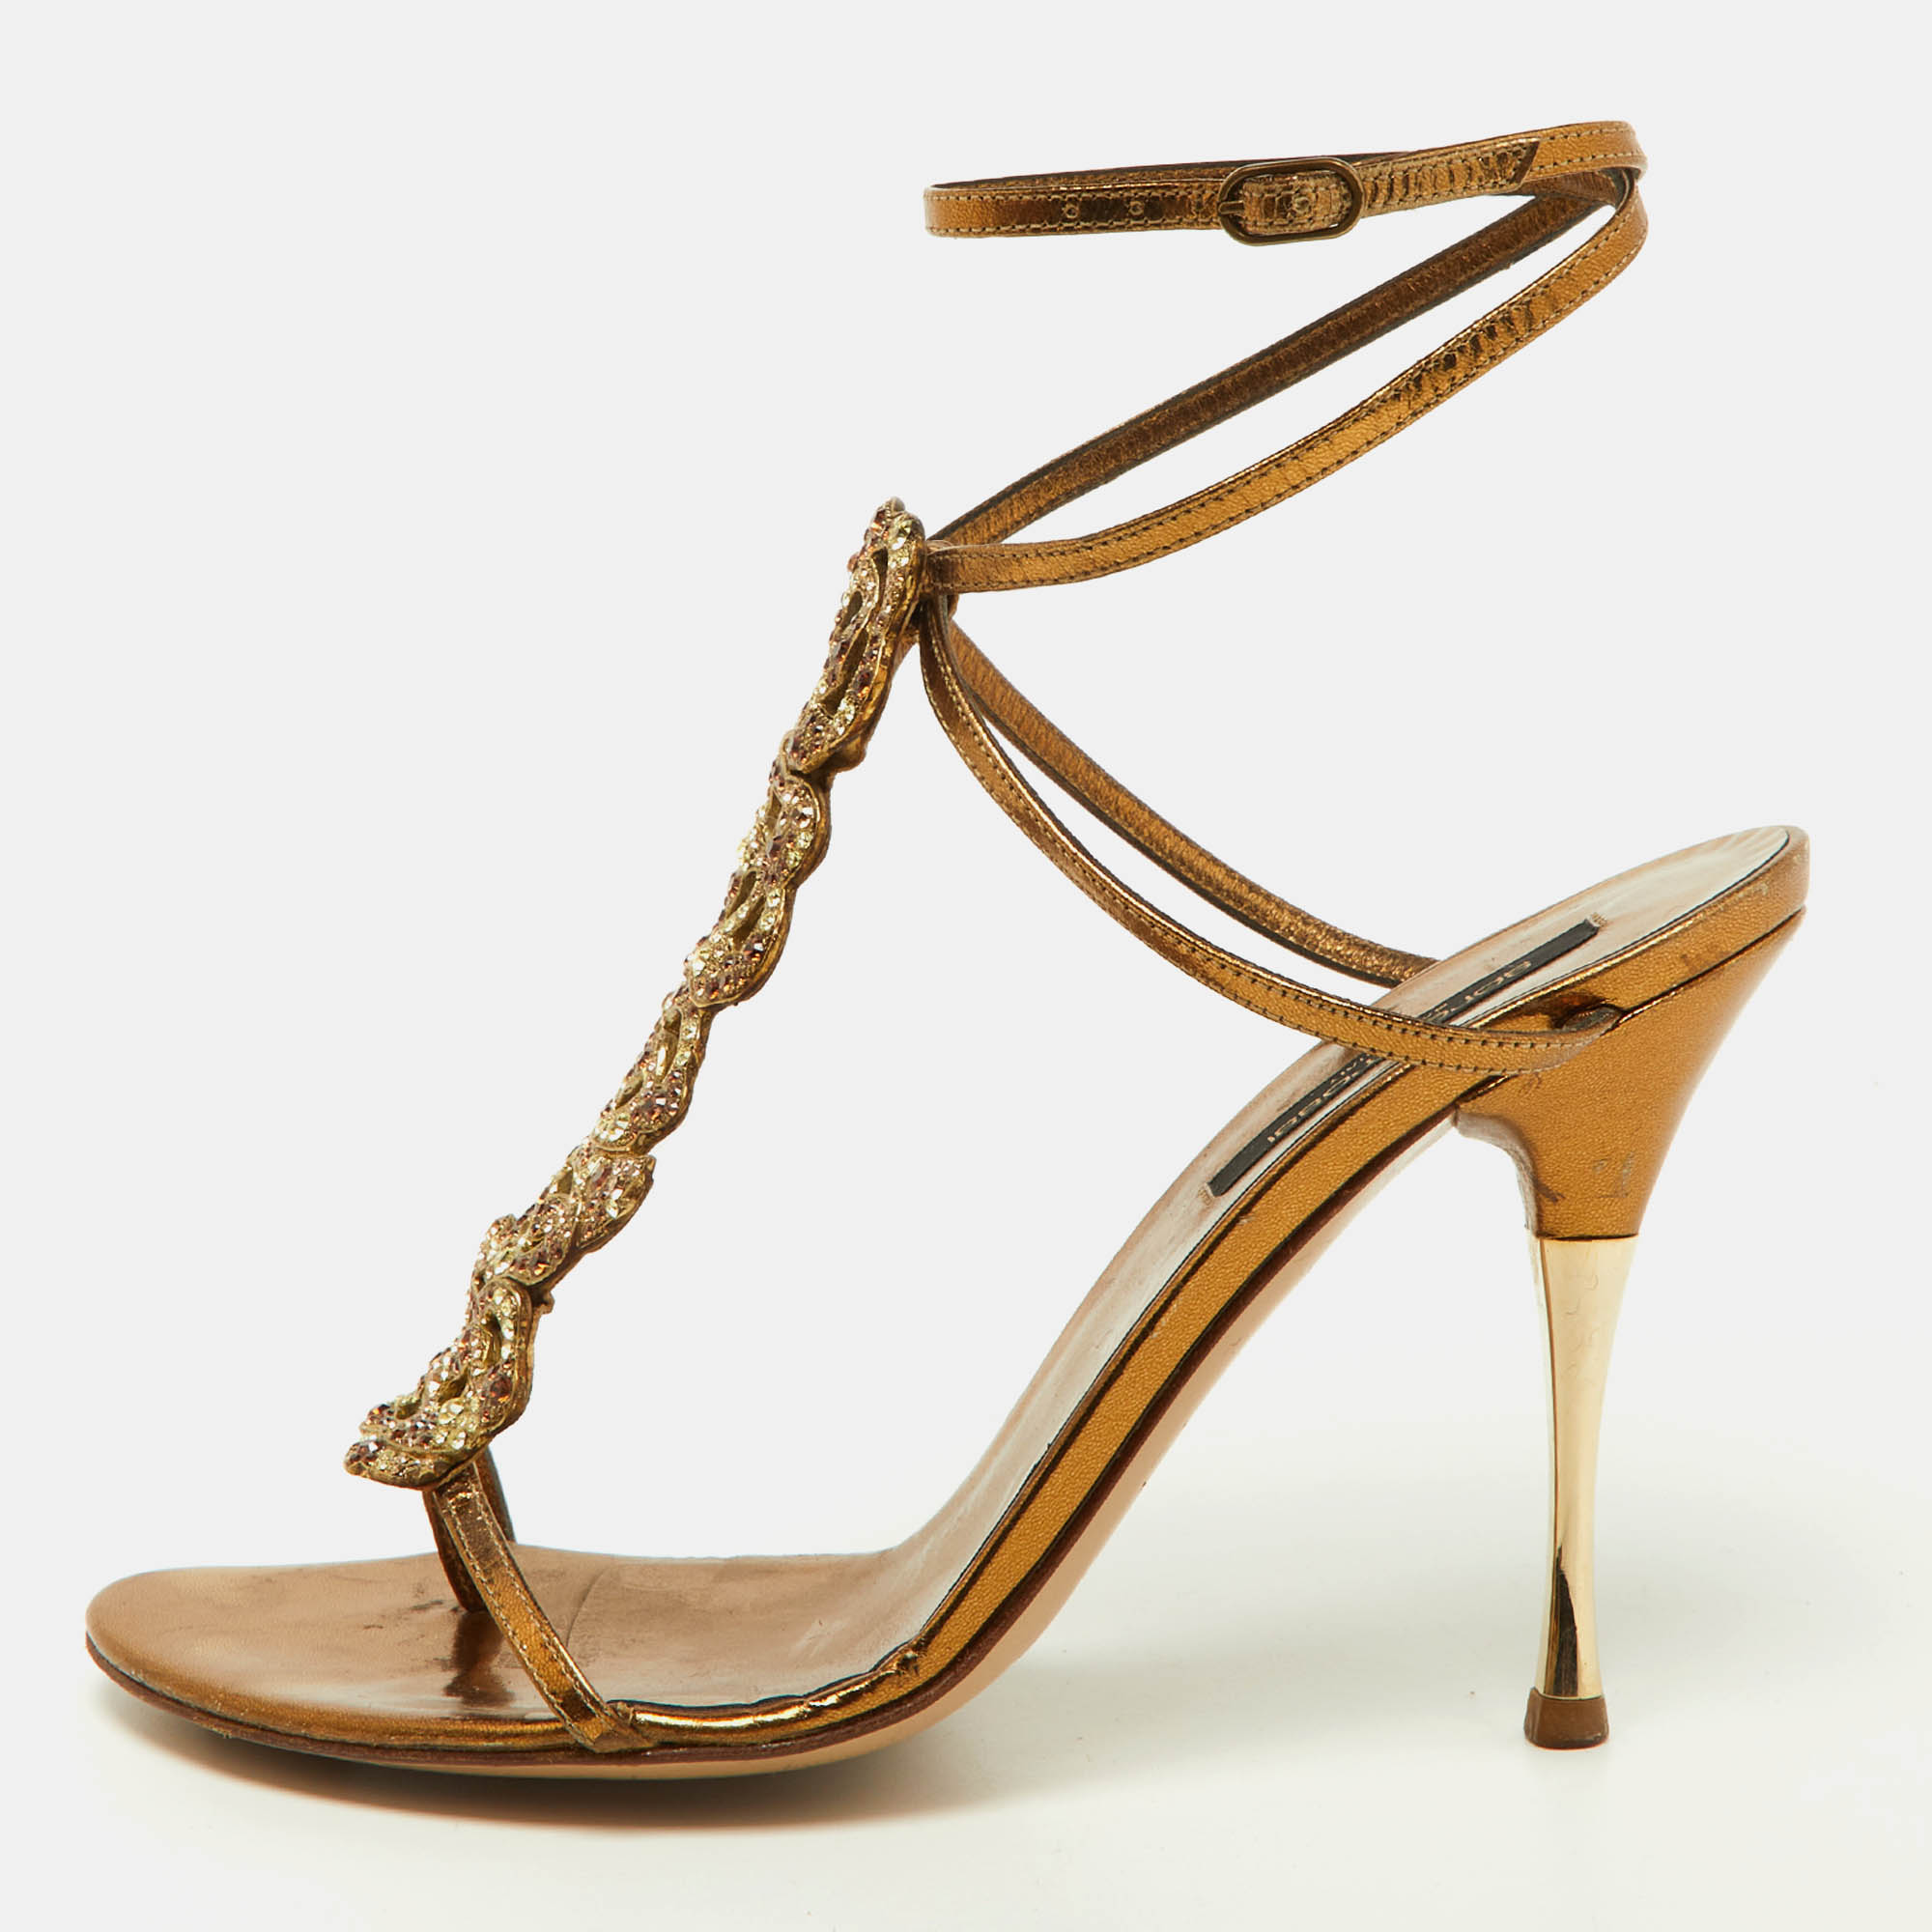 Sergio rossi louis vuitton metallic gold leather crystal embellished ankle strap sandals size 37.5